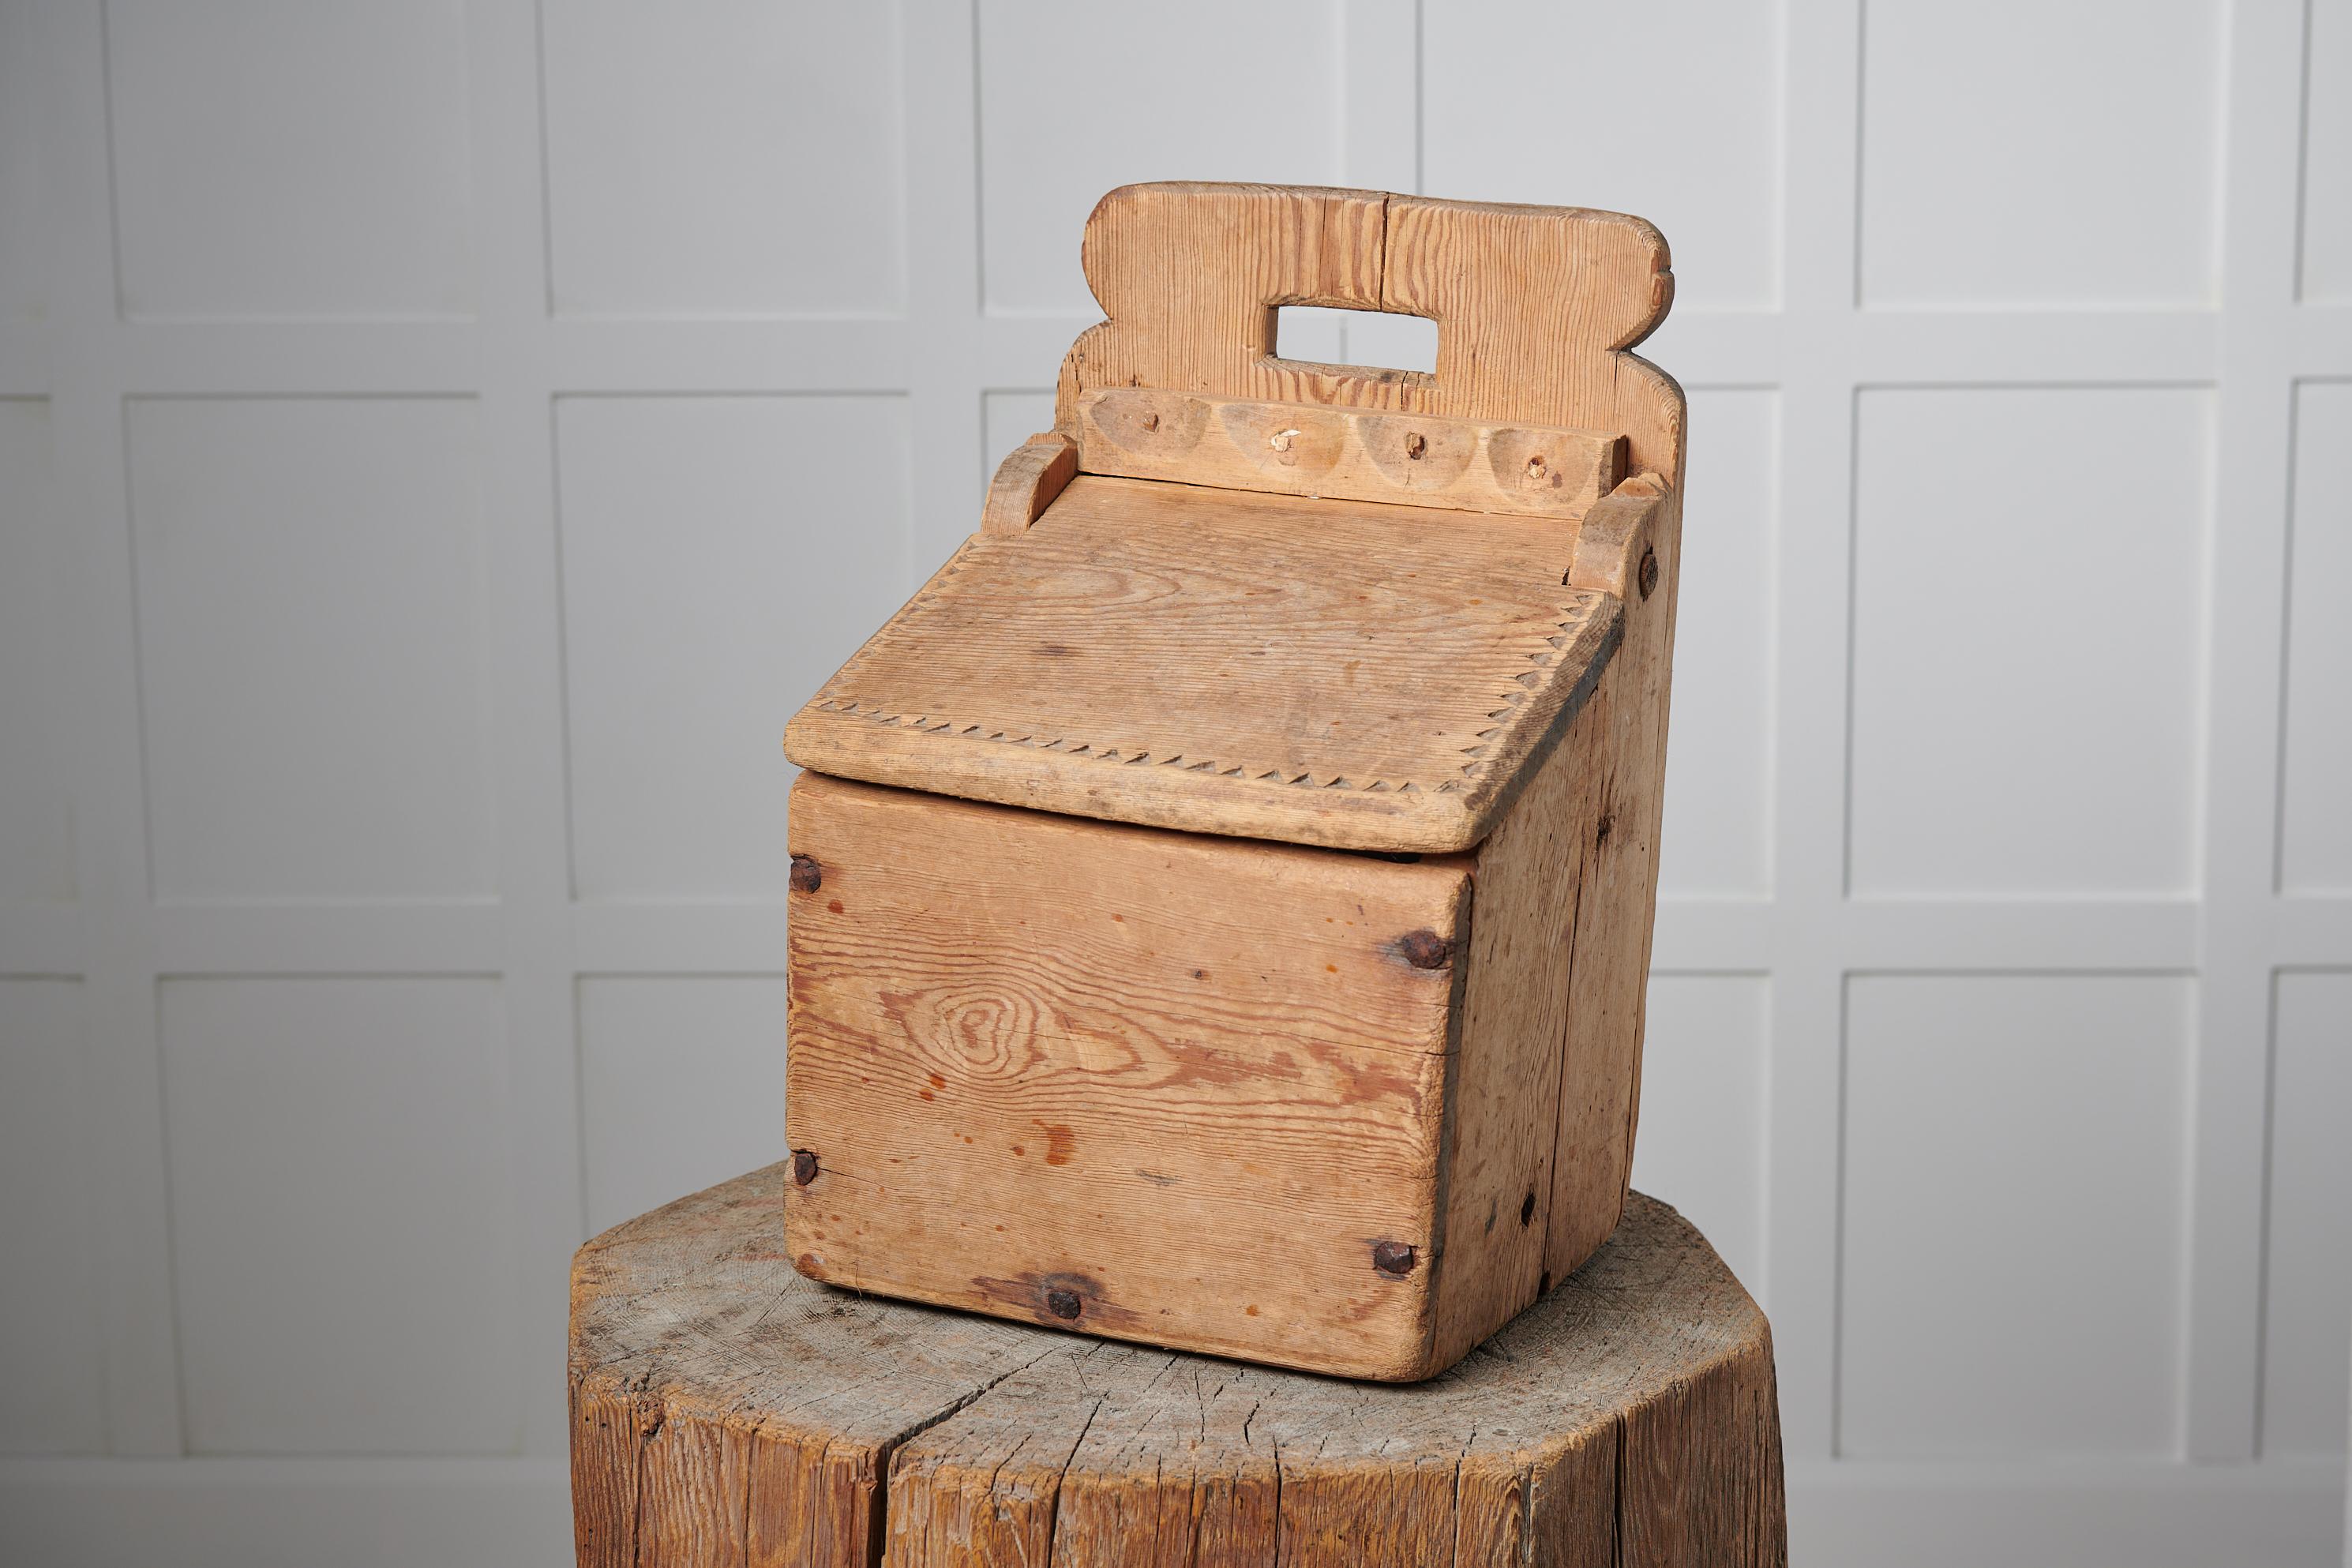 Folk Art flour box from northern Sweden. The box was made by hand during the mid-1800s from pine and was used to store flour. Boxes like this would be standing freely on the counter or hung on the wall in the kitchen to make the flour easy to reach.